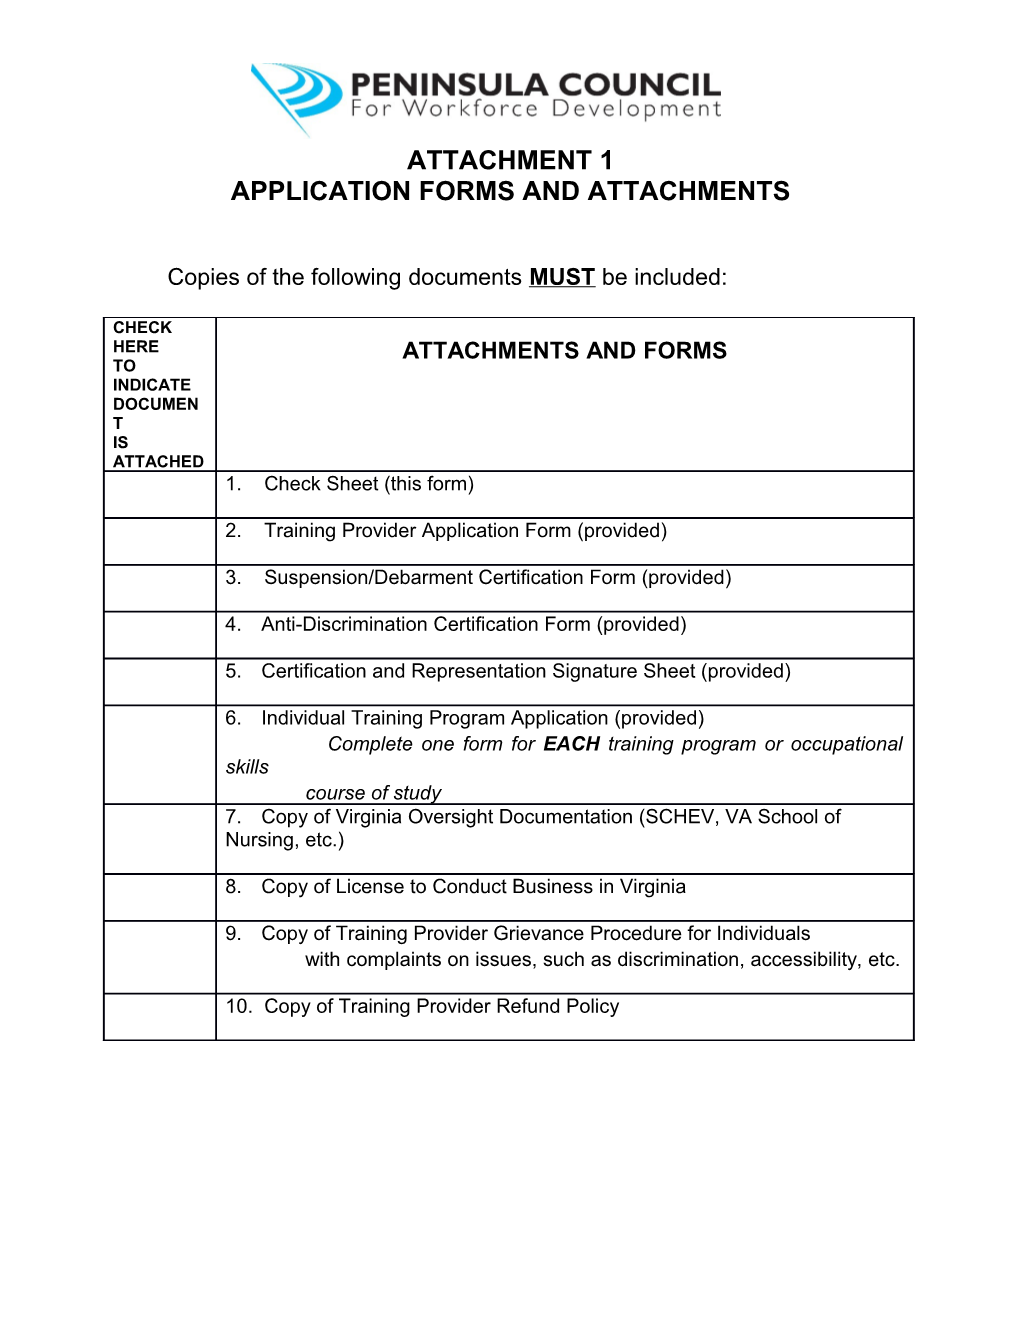 Application Forms and Attachments